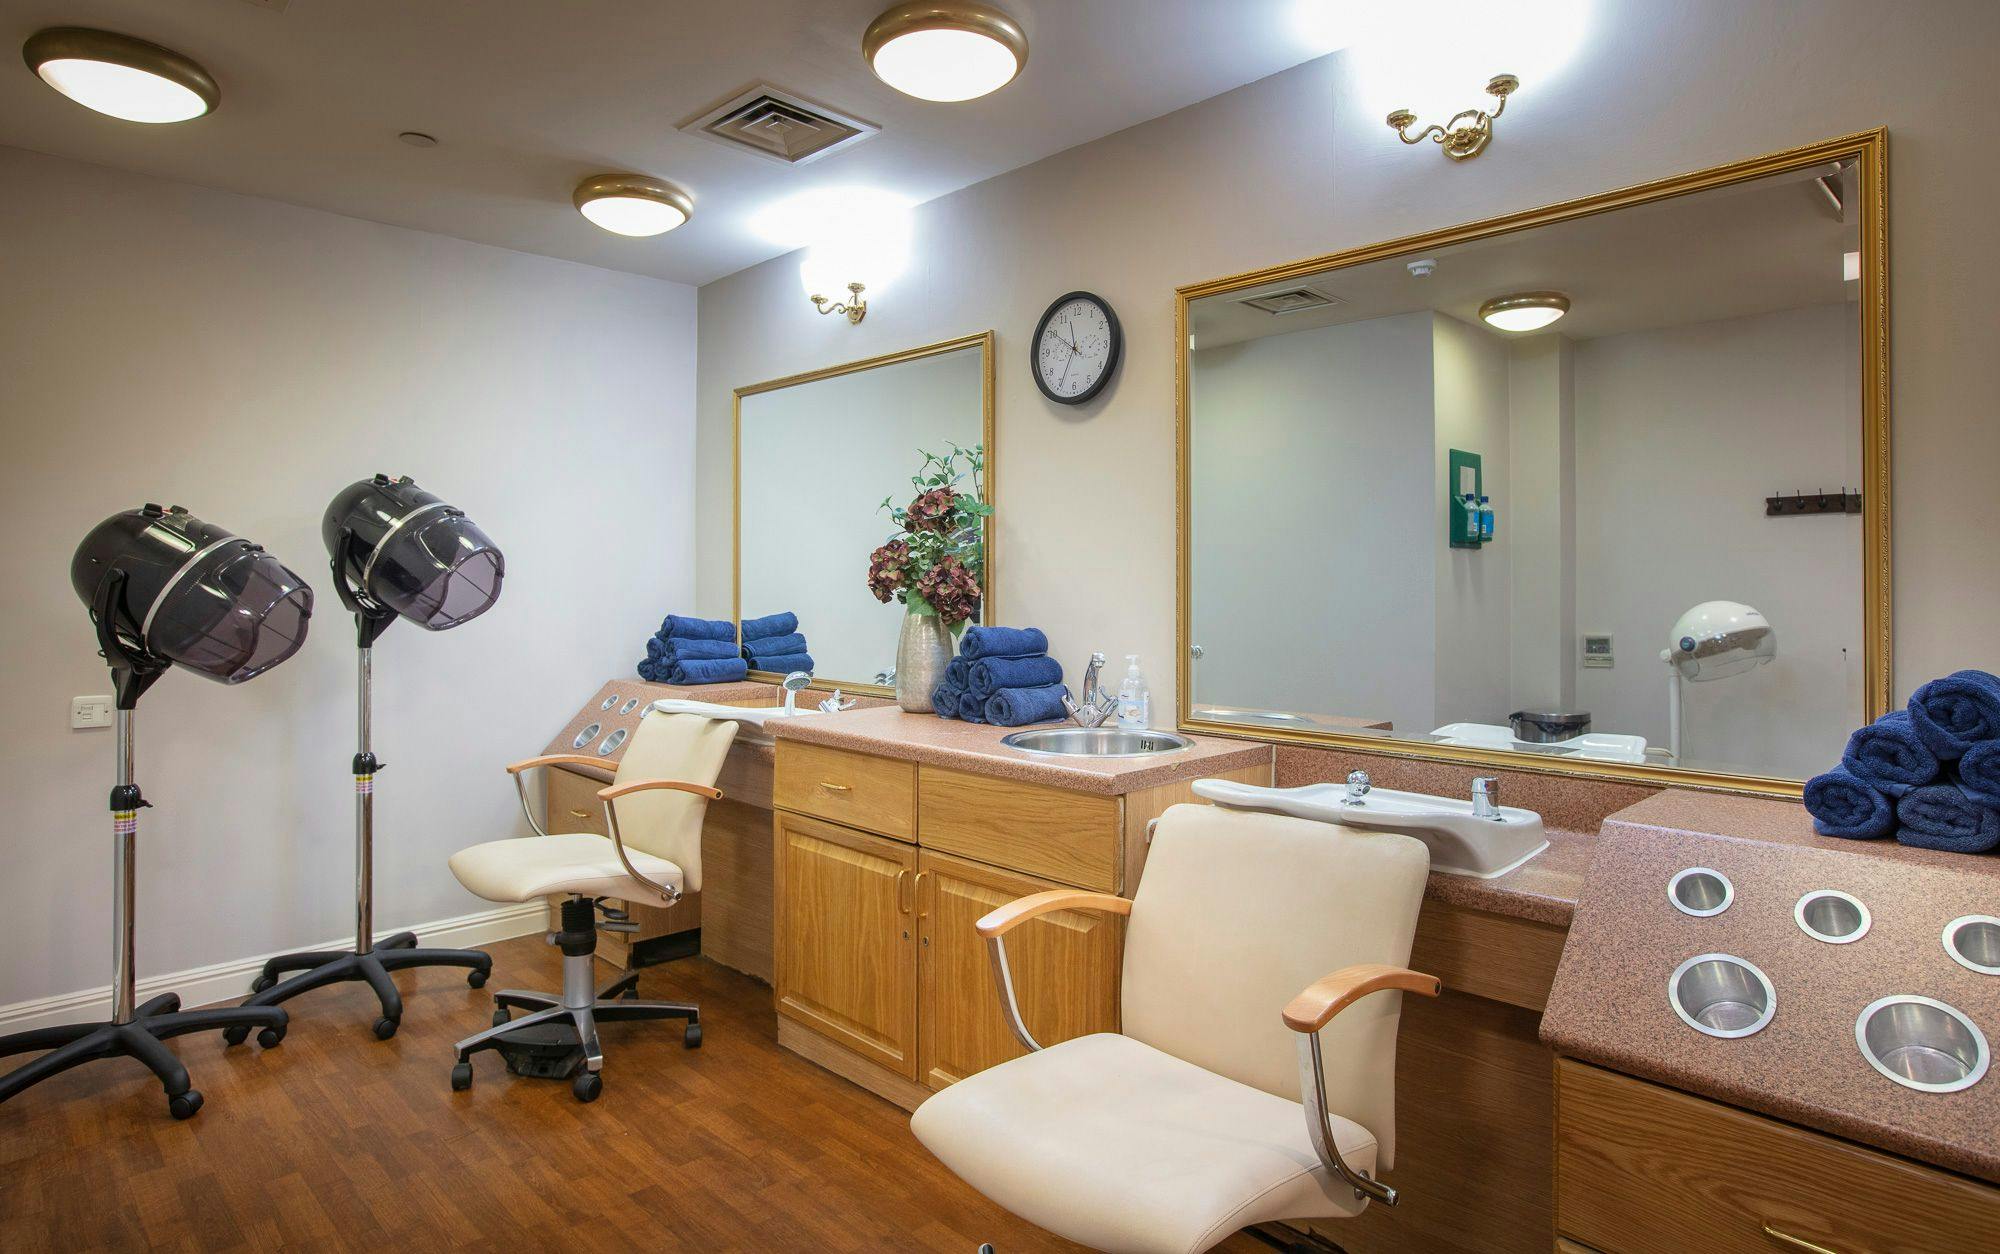 Salon at Esher Manor Care Home in Esher, Surrey